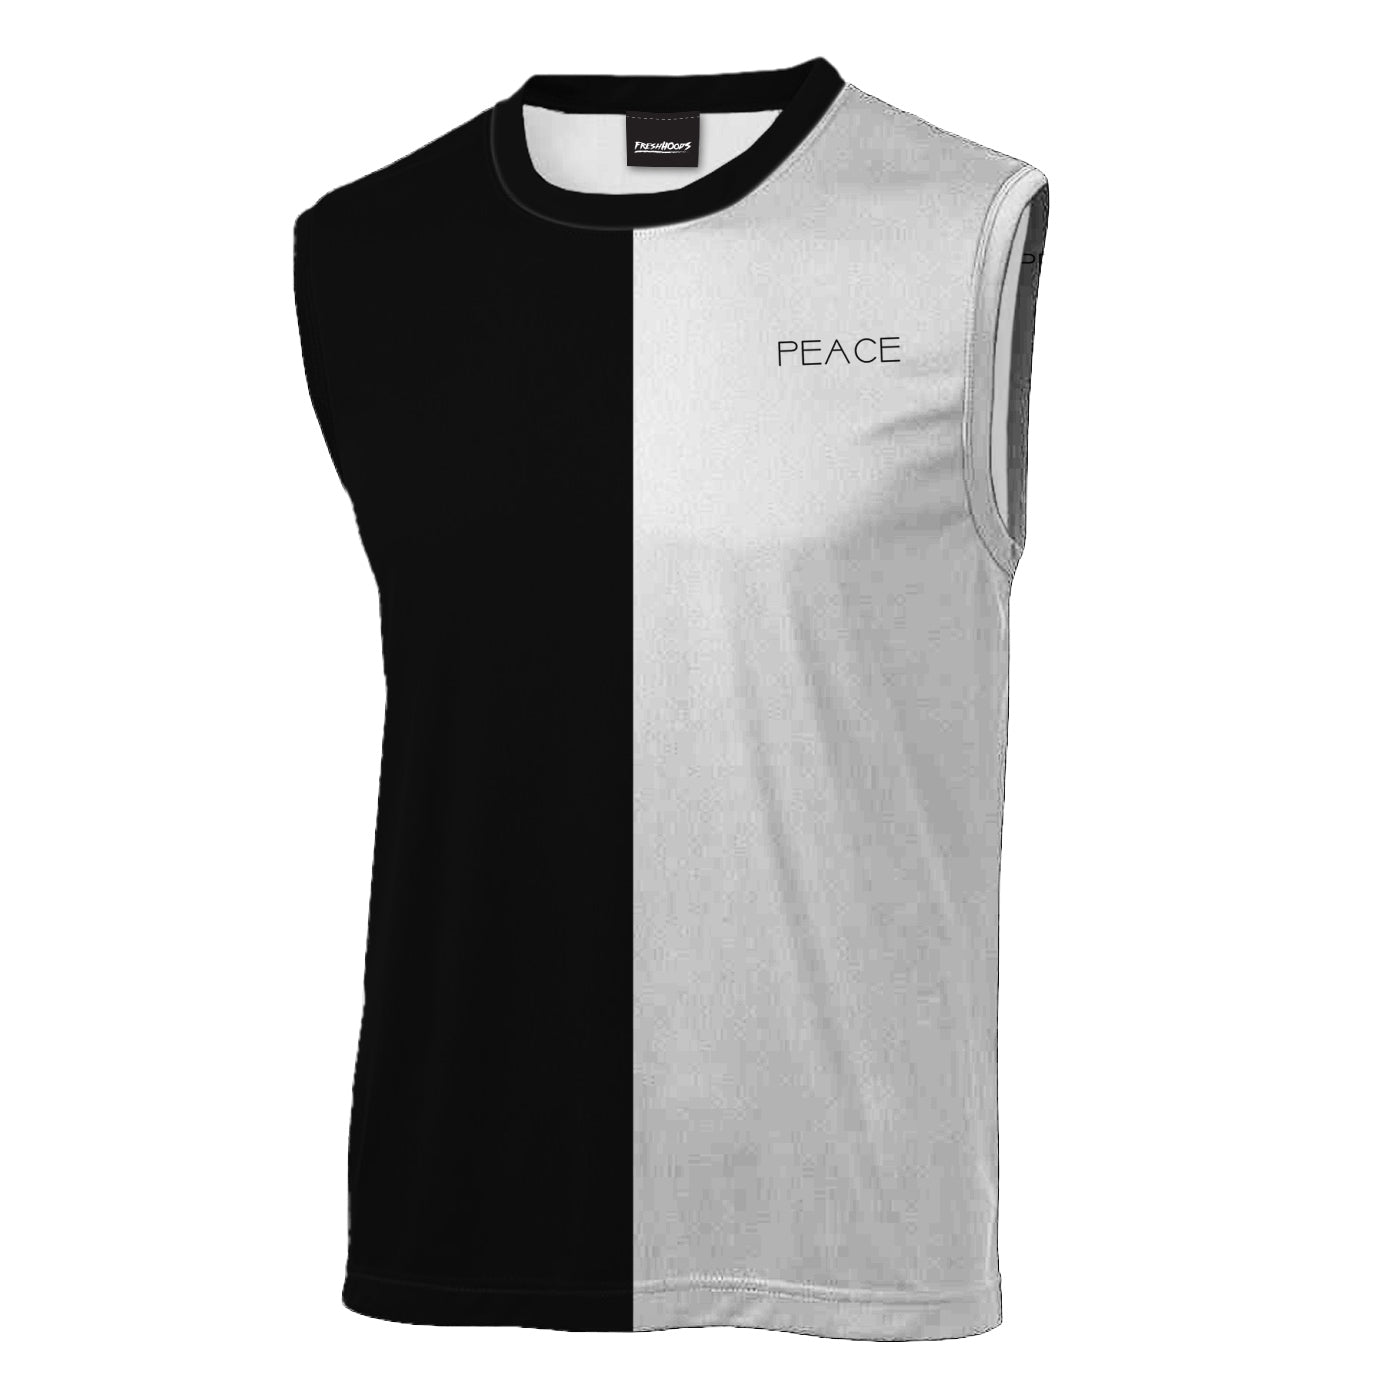 Together In Peace Sleeveless T-Shirt